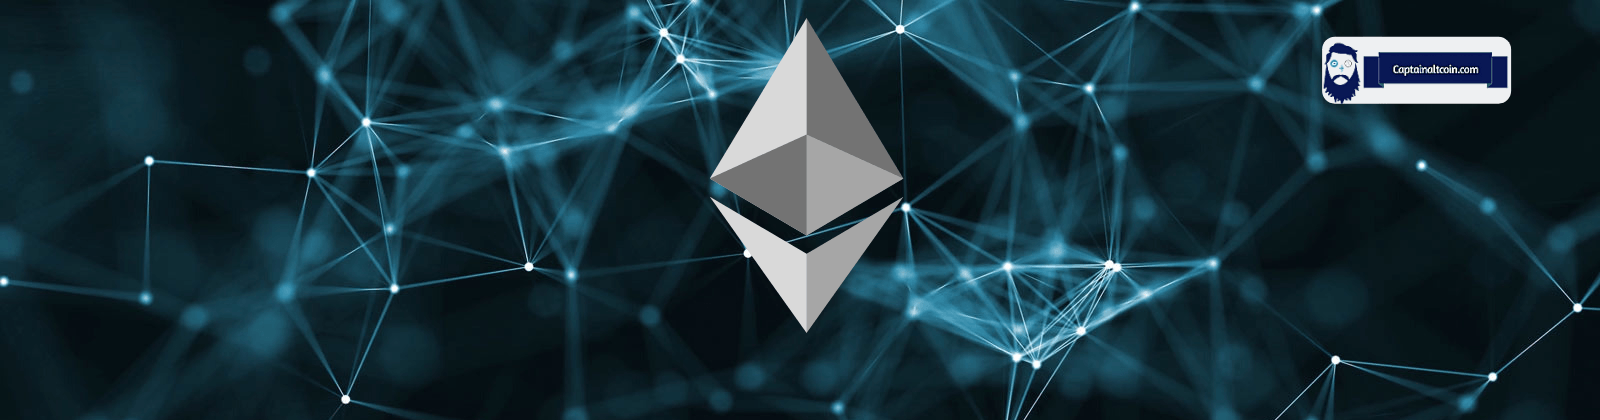 Ethereum Price Prediction 2022 -2030 | Is ETH a Good Investment?